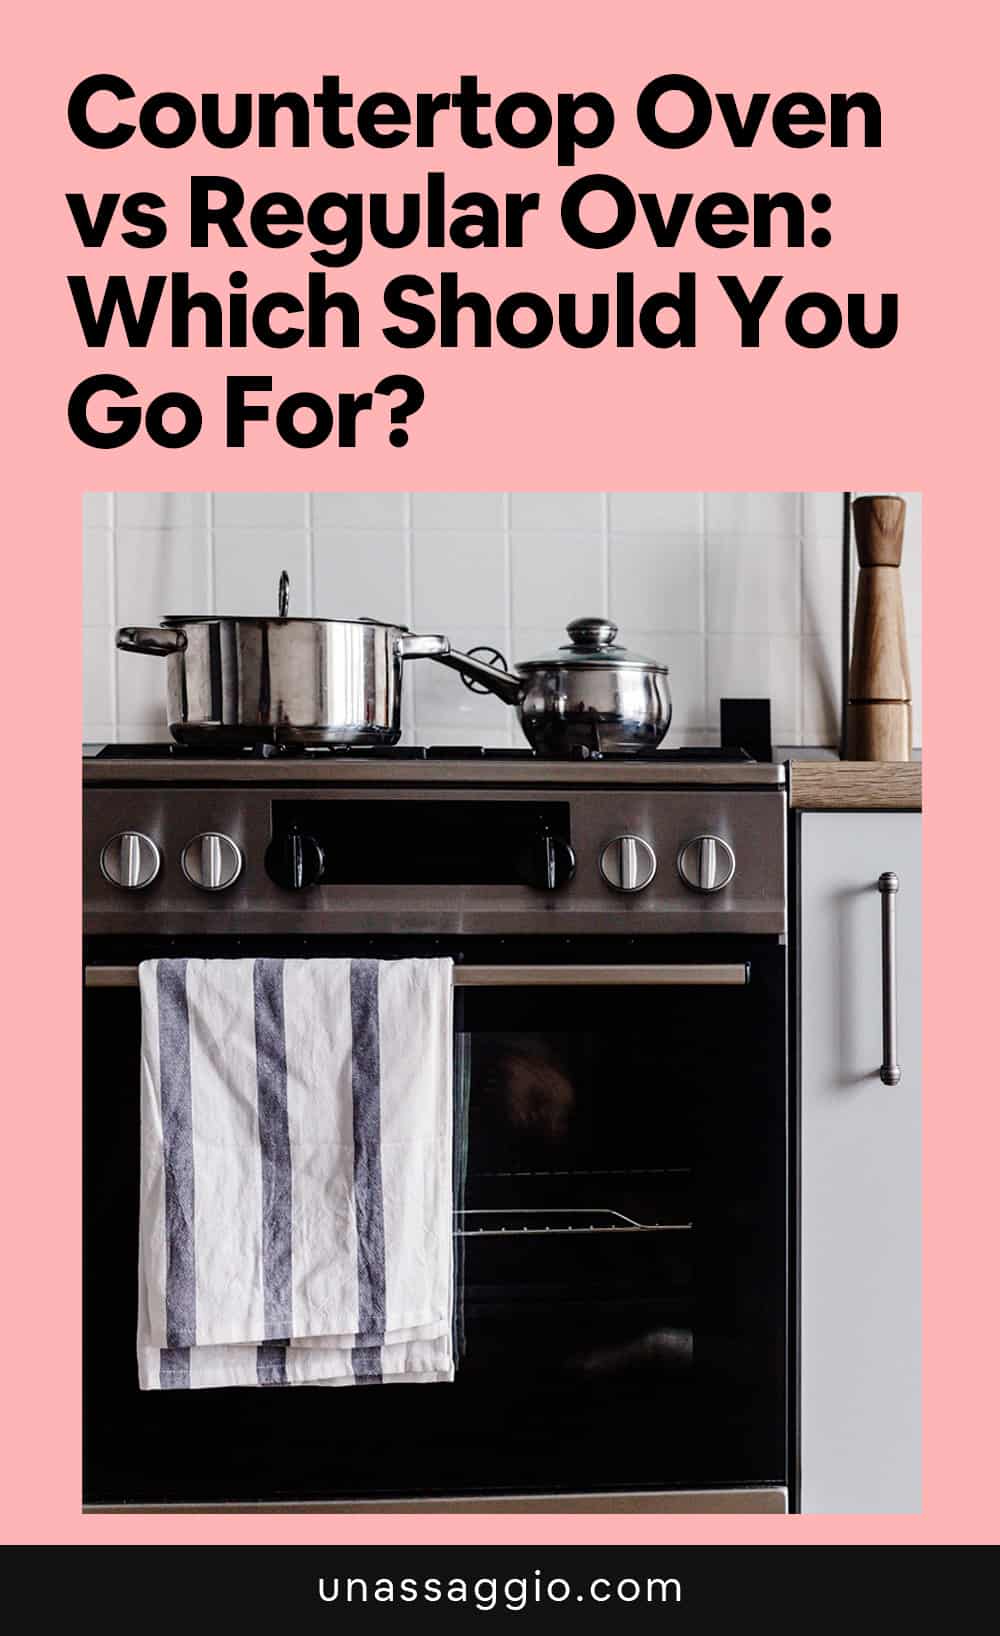 Countertop Oven vs Regular Oven: Which Should You Go For?